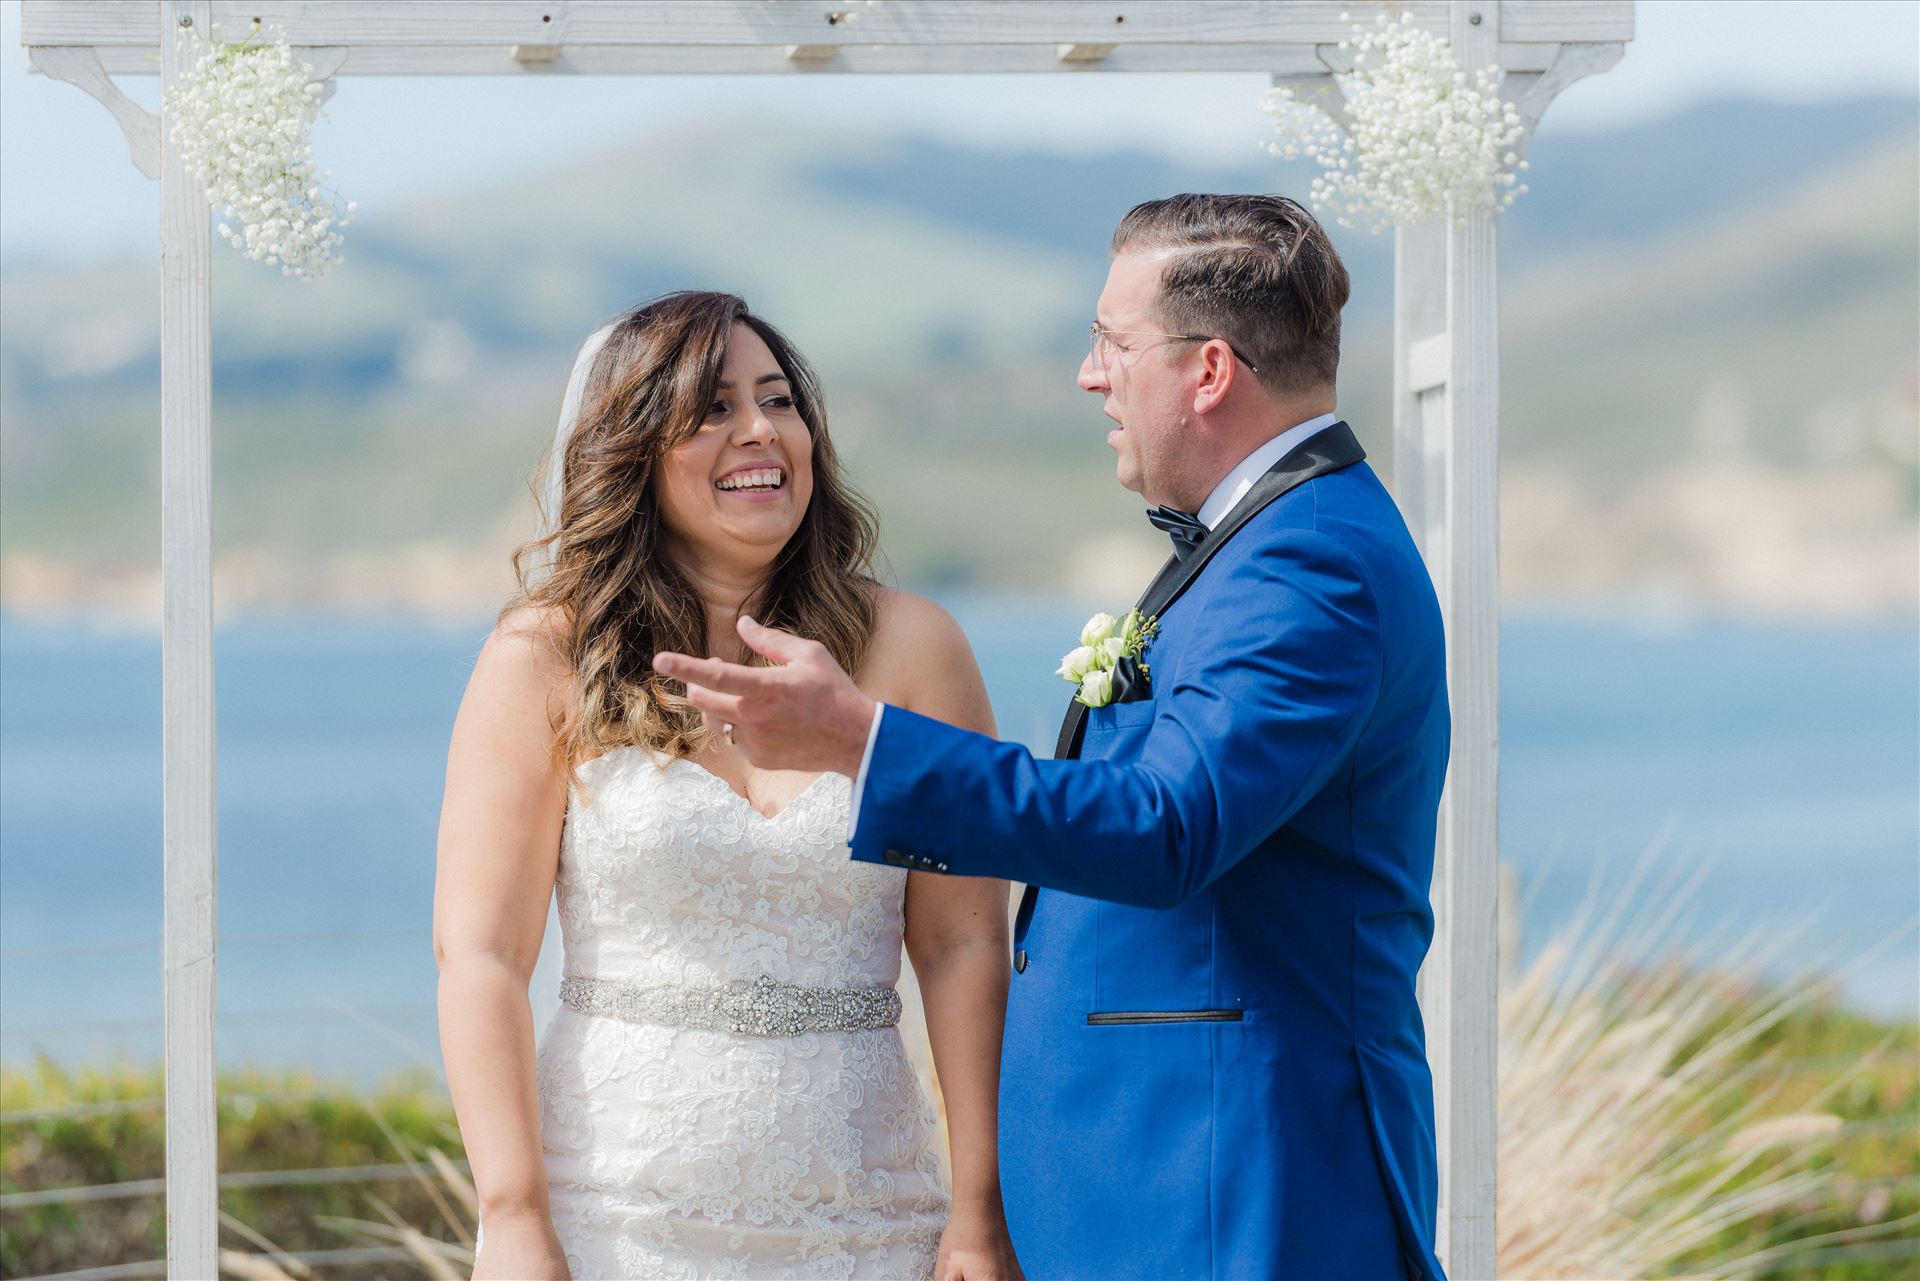 Candy and Christopher 13 - Wedding at Dolphin Bay Resort and Spa in Shell Beach, California by Sarah Williams of Mirror's Edge Photography, a San Luis Obispo County Wedding Photographer. Wedding vows at Spyglass by Sarah Williams